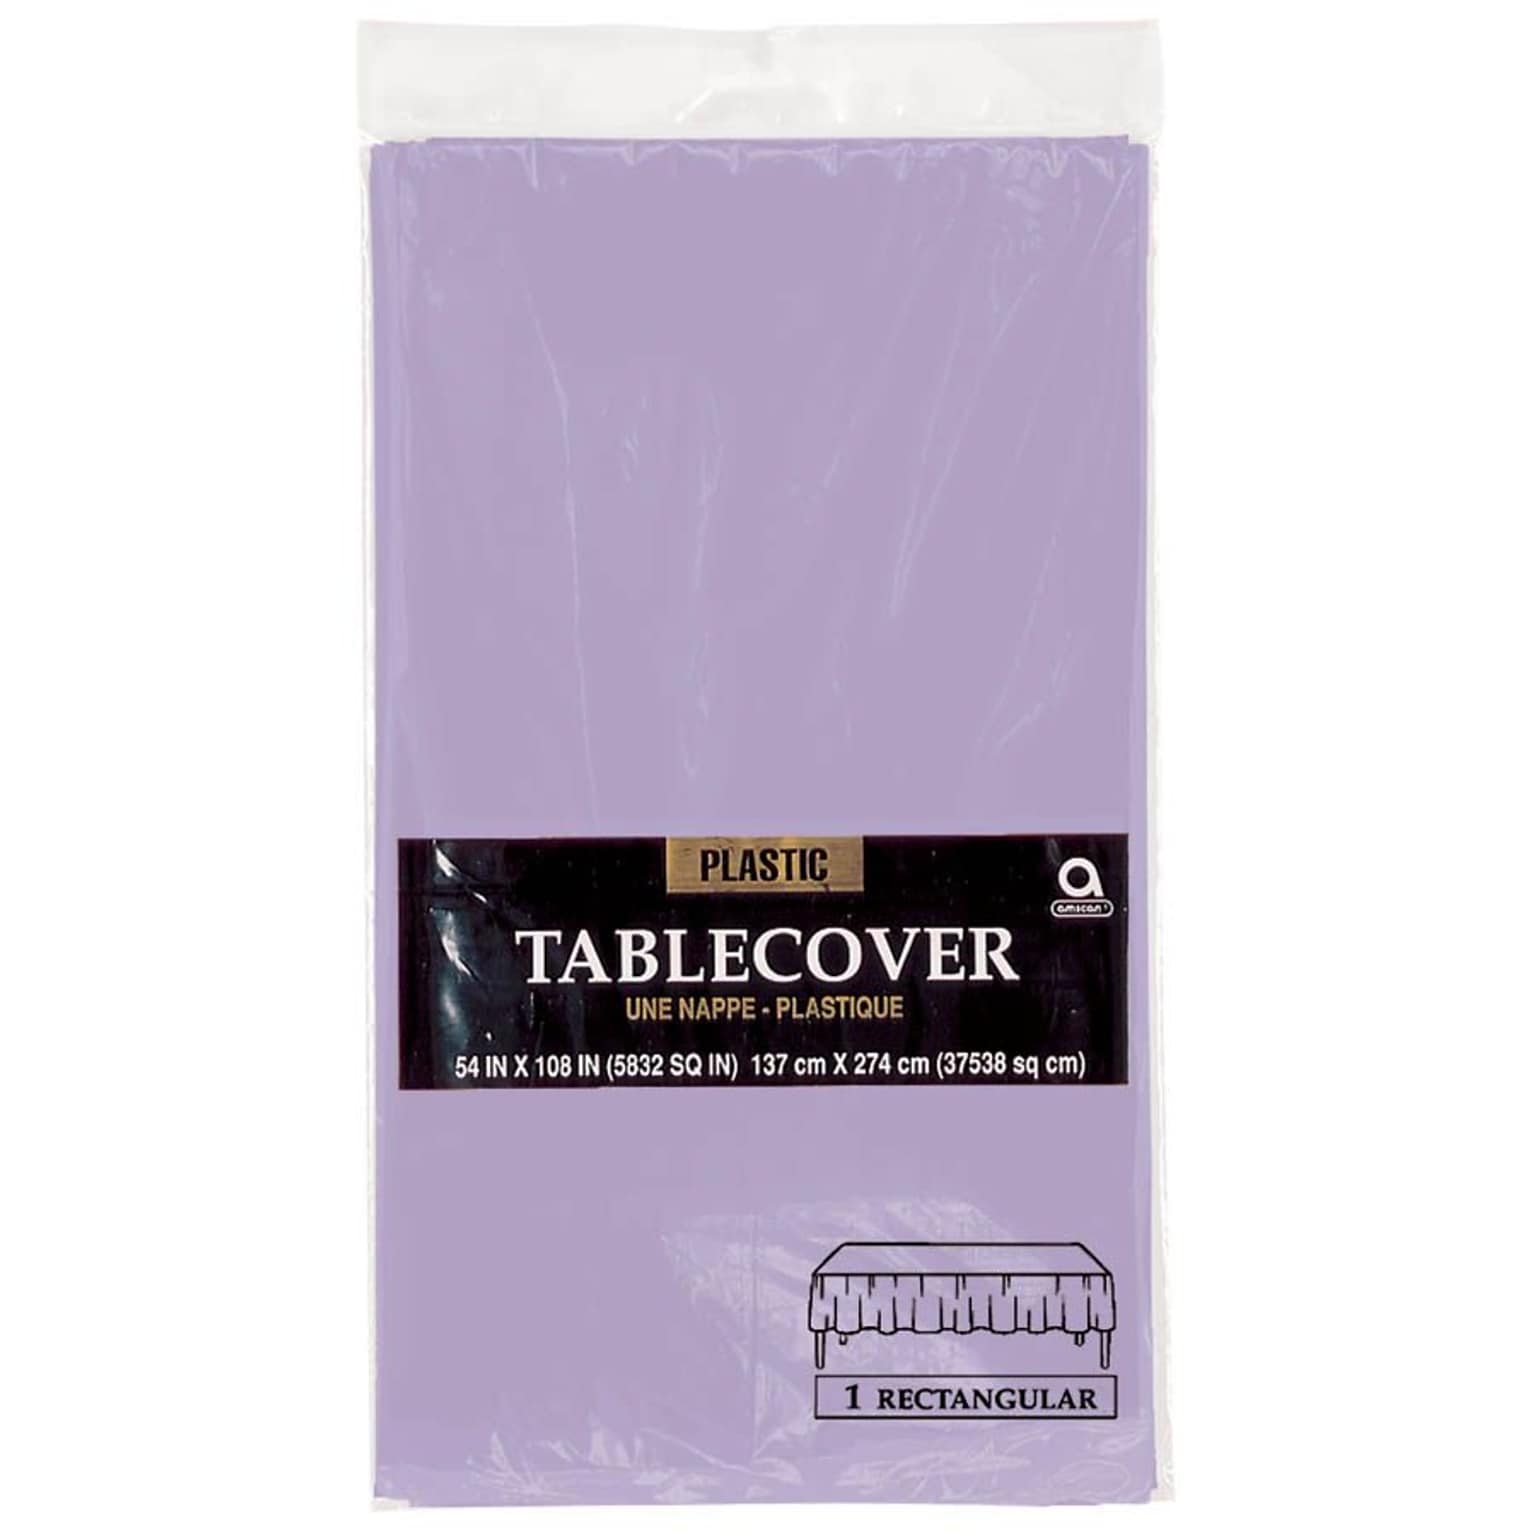 Amscan Plastic Tablecover, 54 x 108, Lavender, 12/Pack (77015.04)